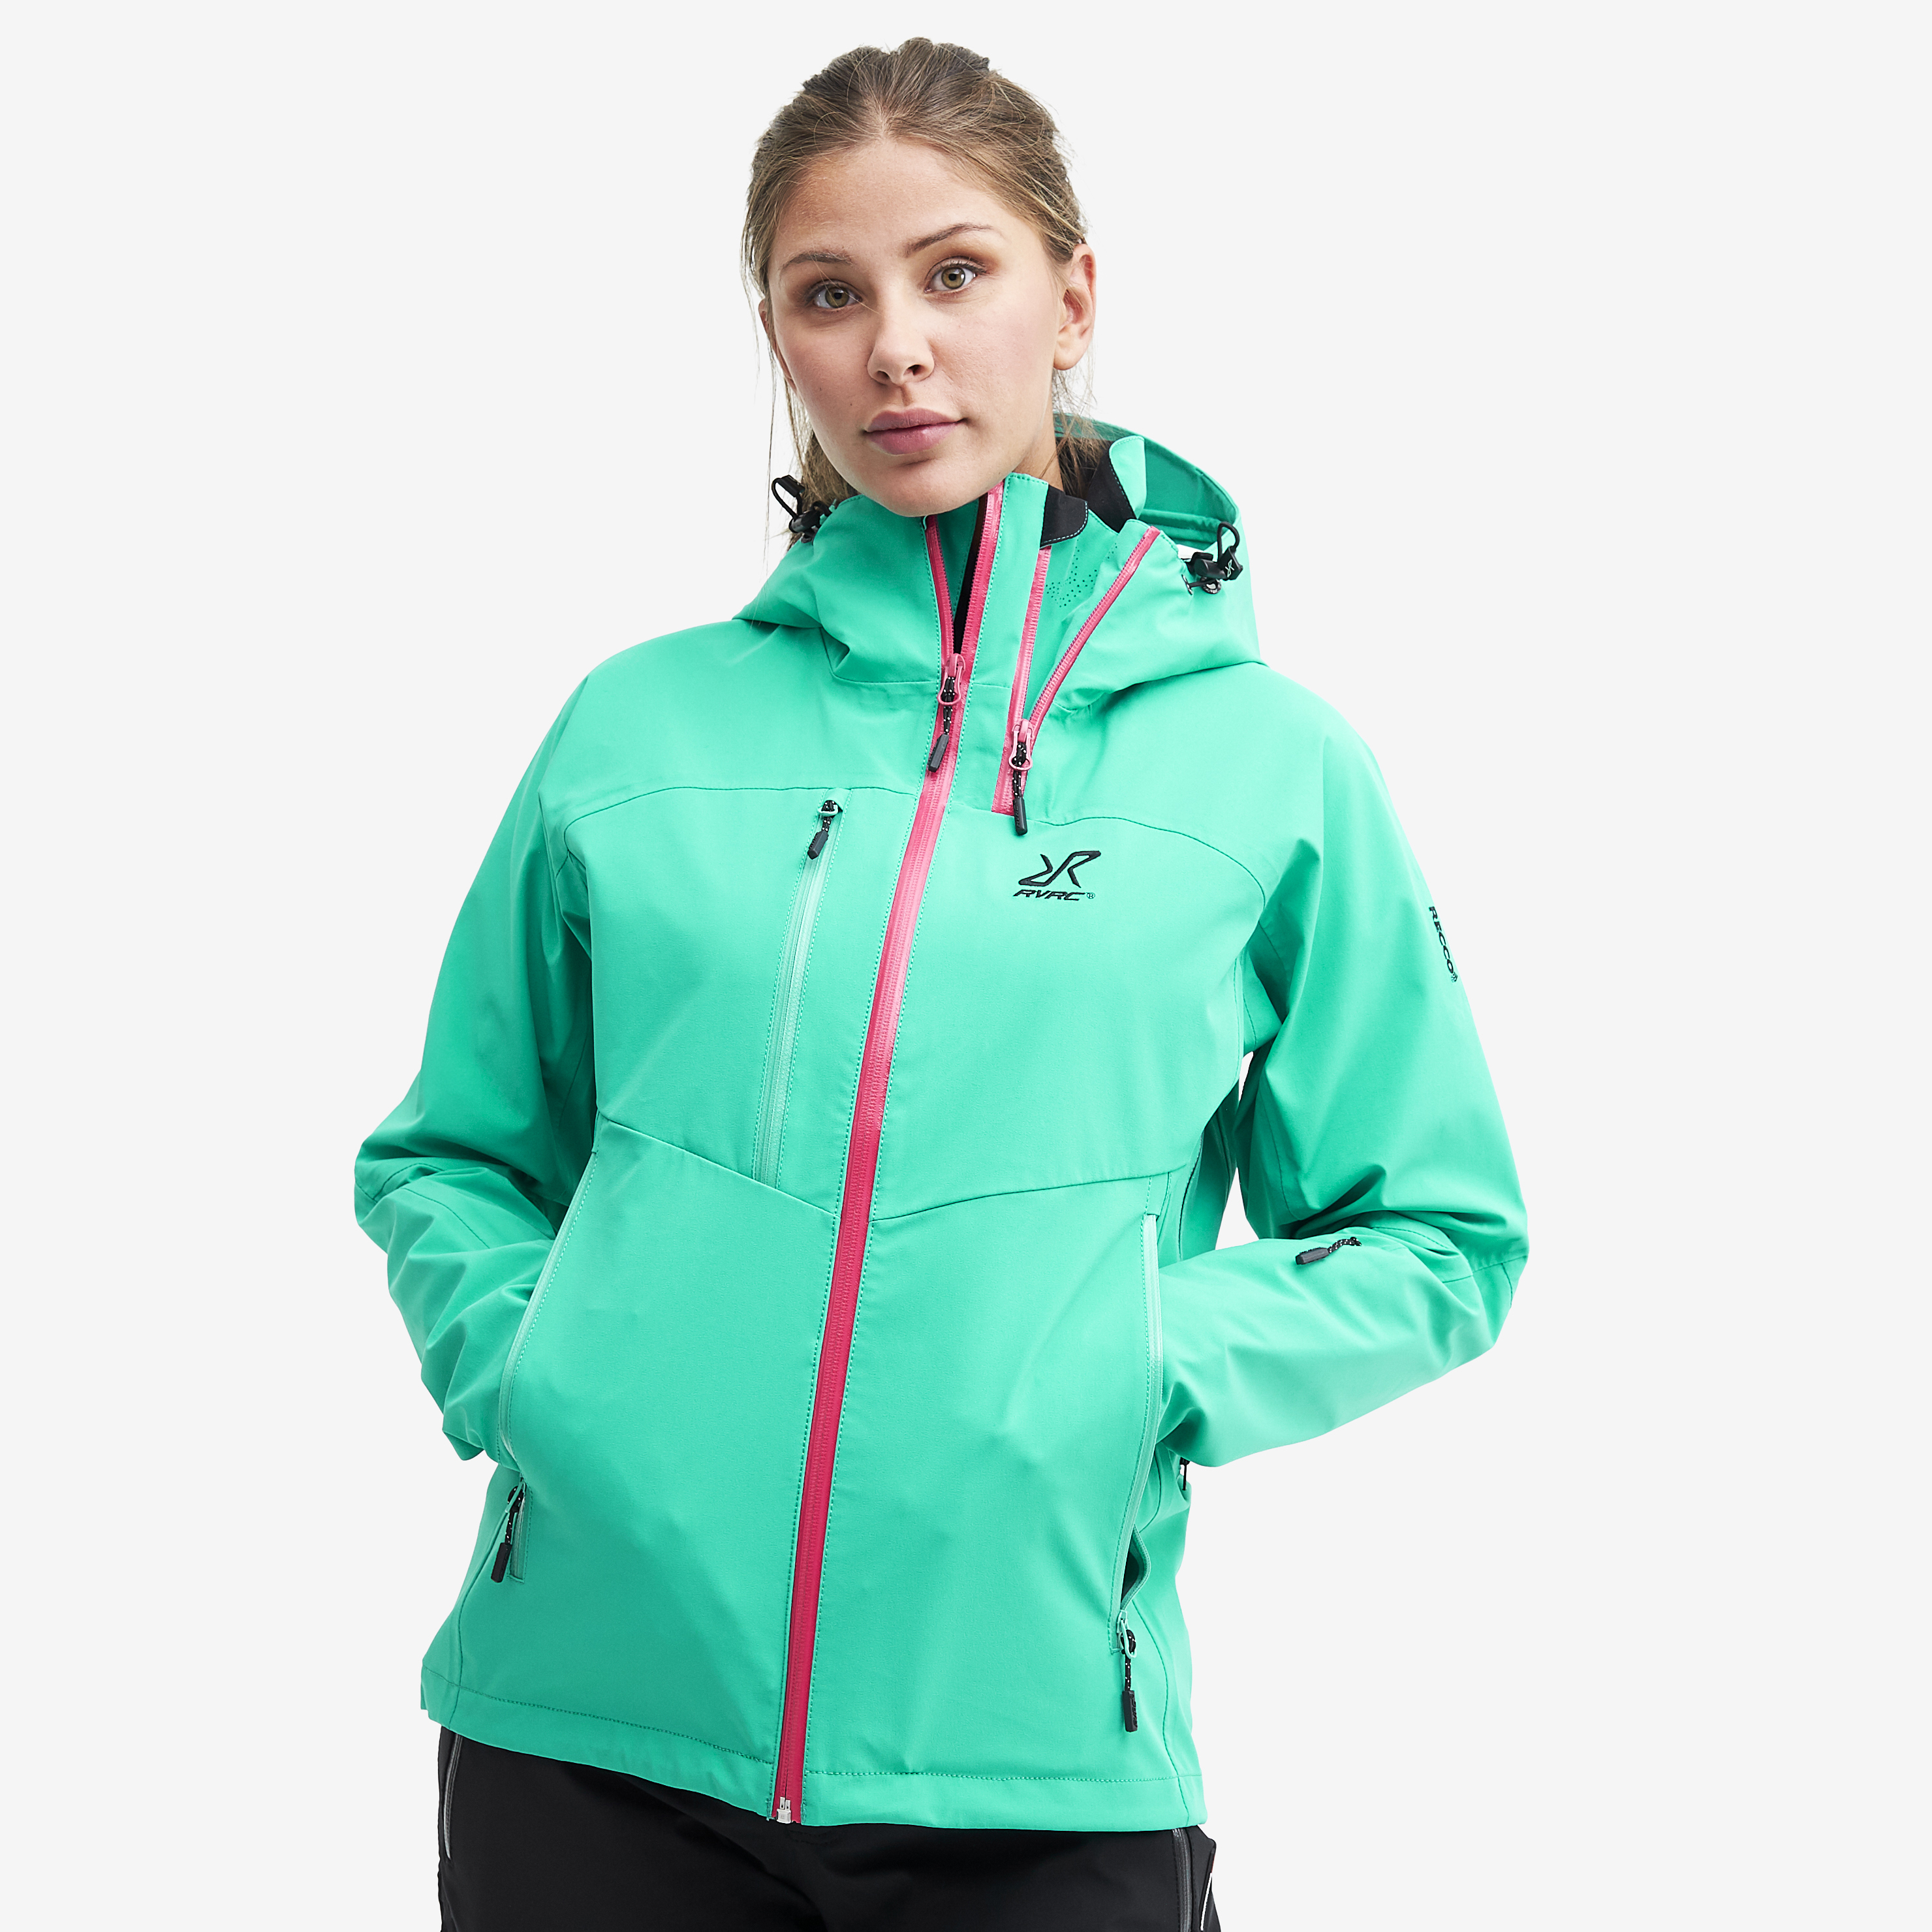 Cyclone Rescue Jacket 2.0 Spectra Green Donna